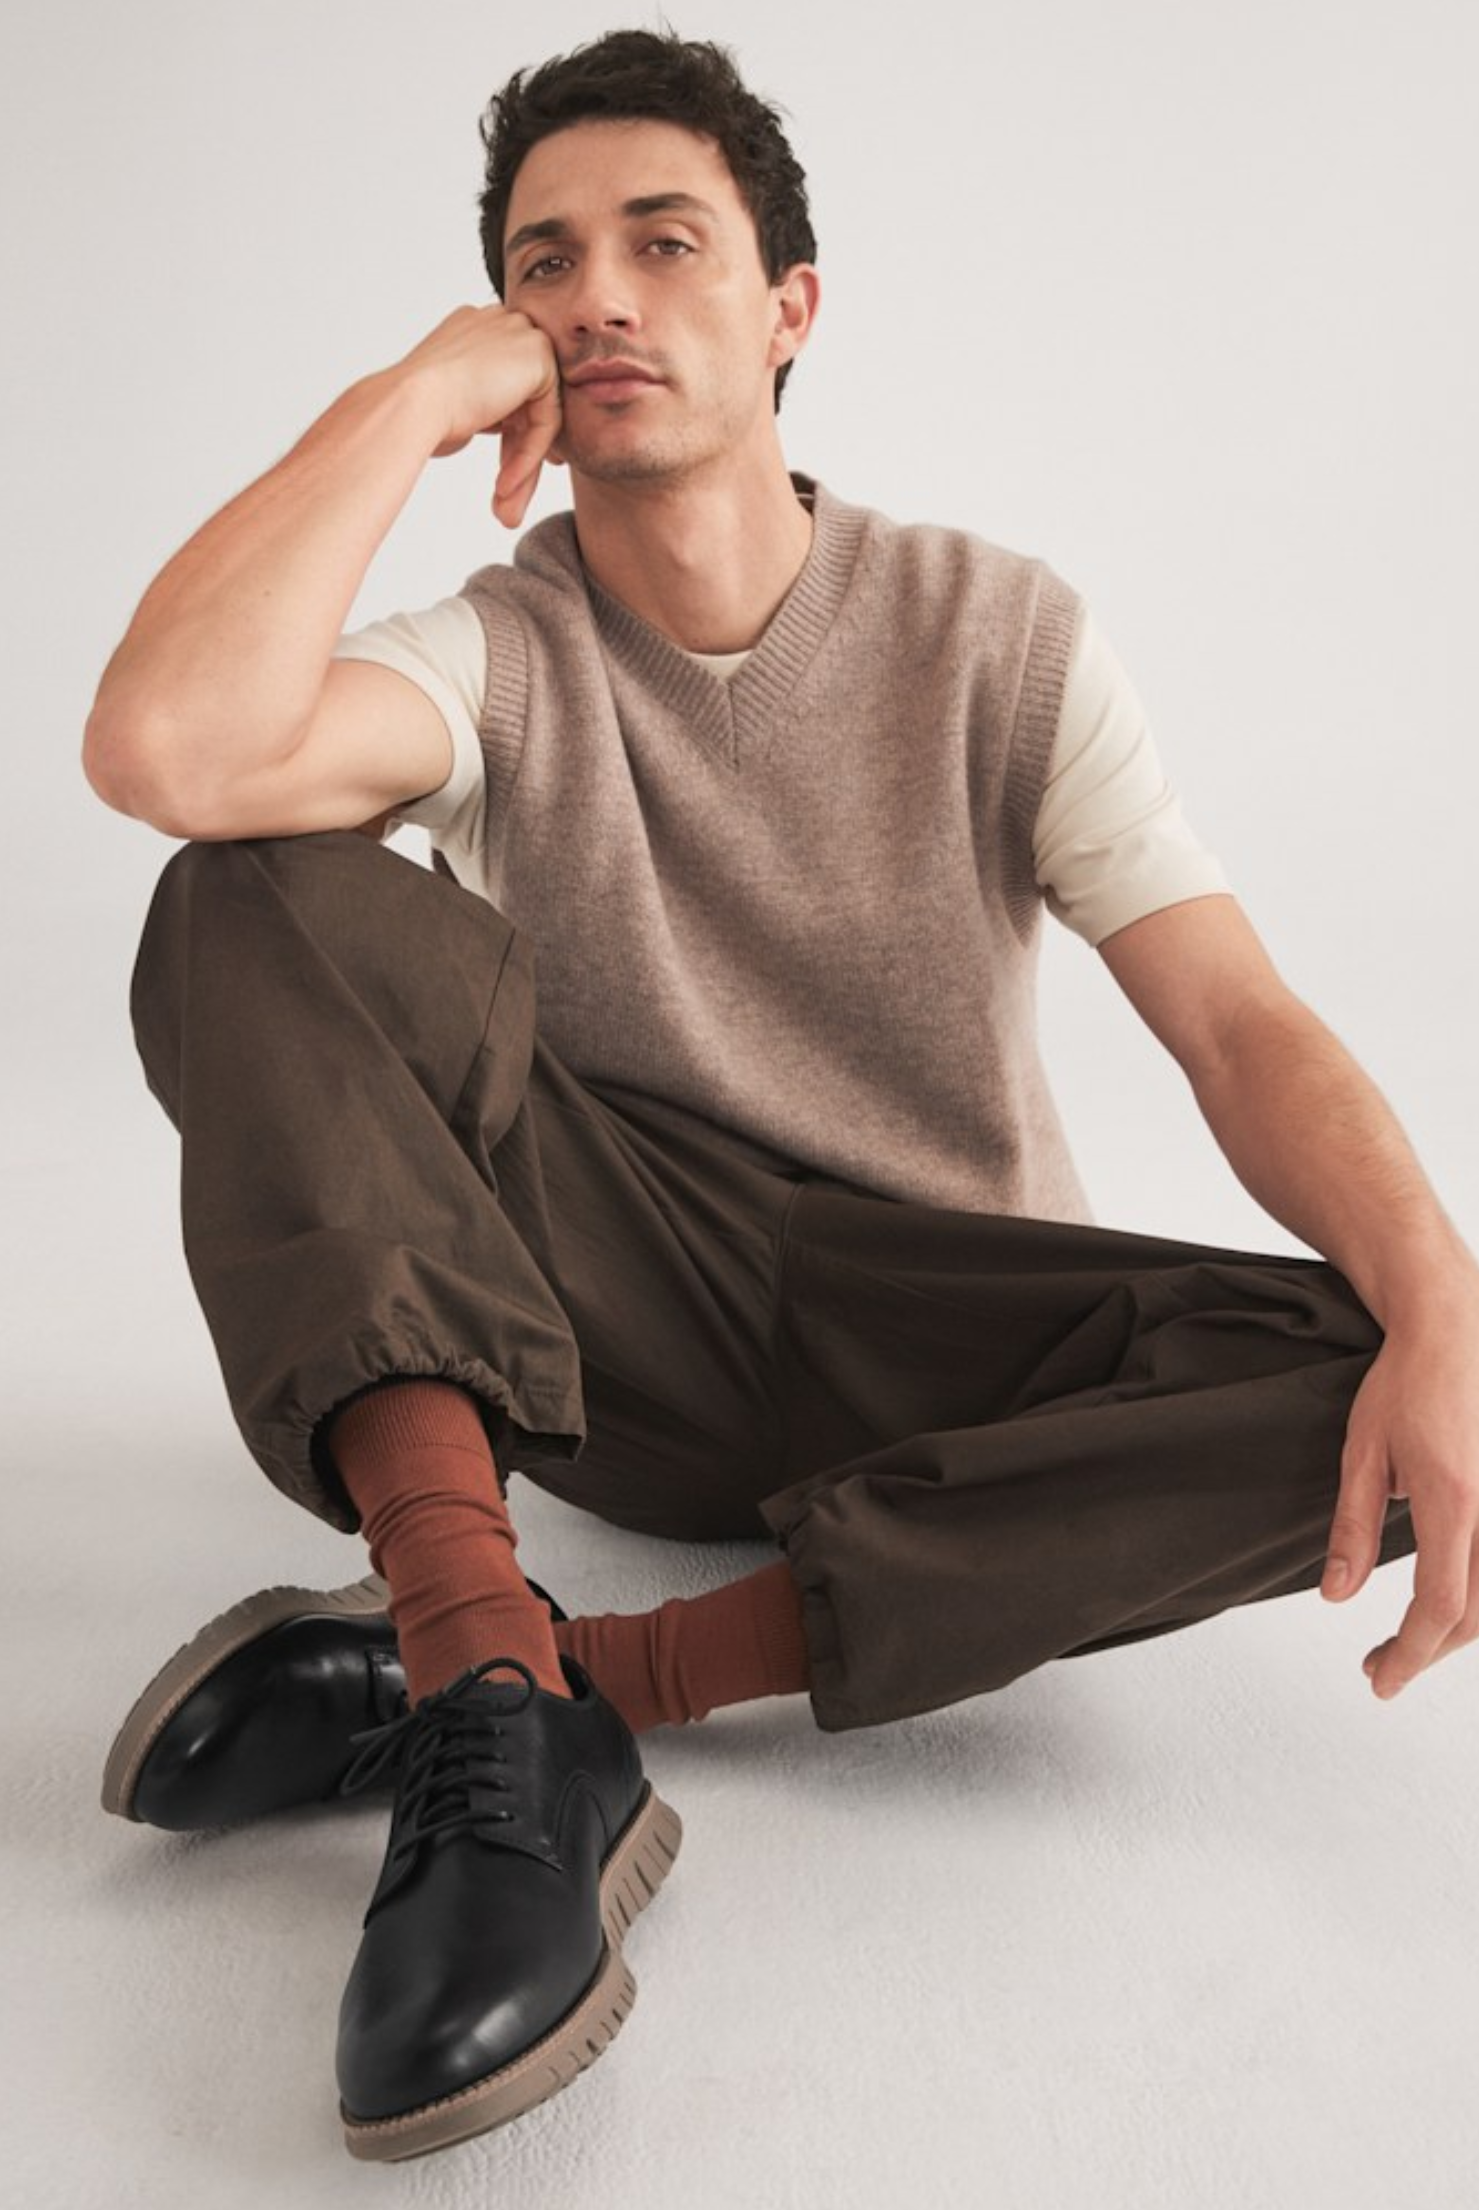 male model in a smart casual outfit sitting on a studio floor while wearing black oxford shoes